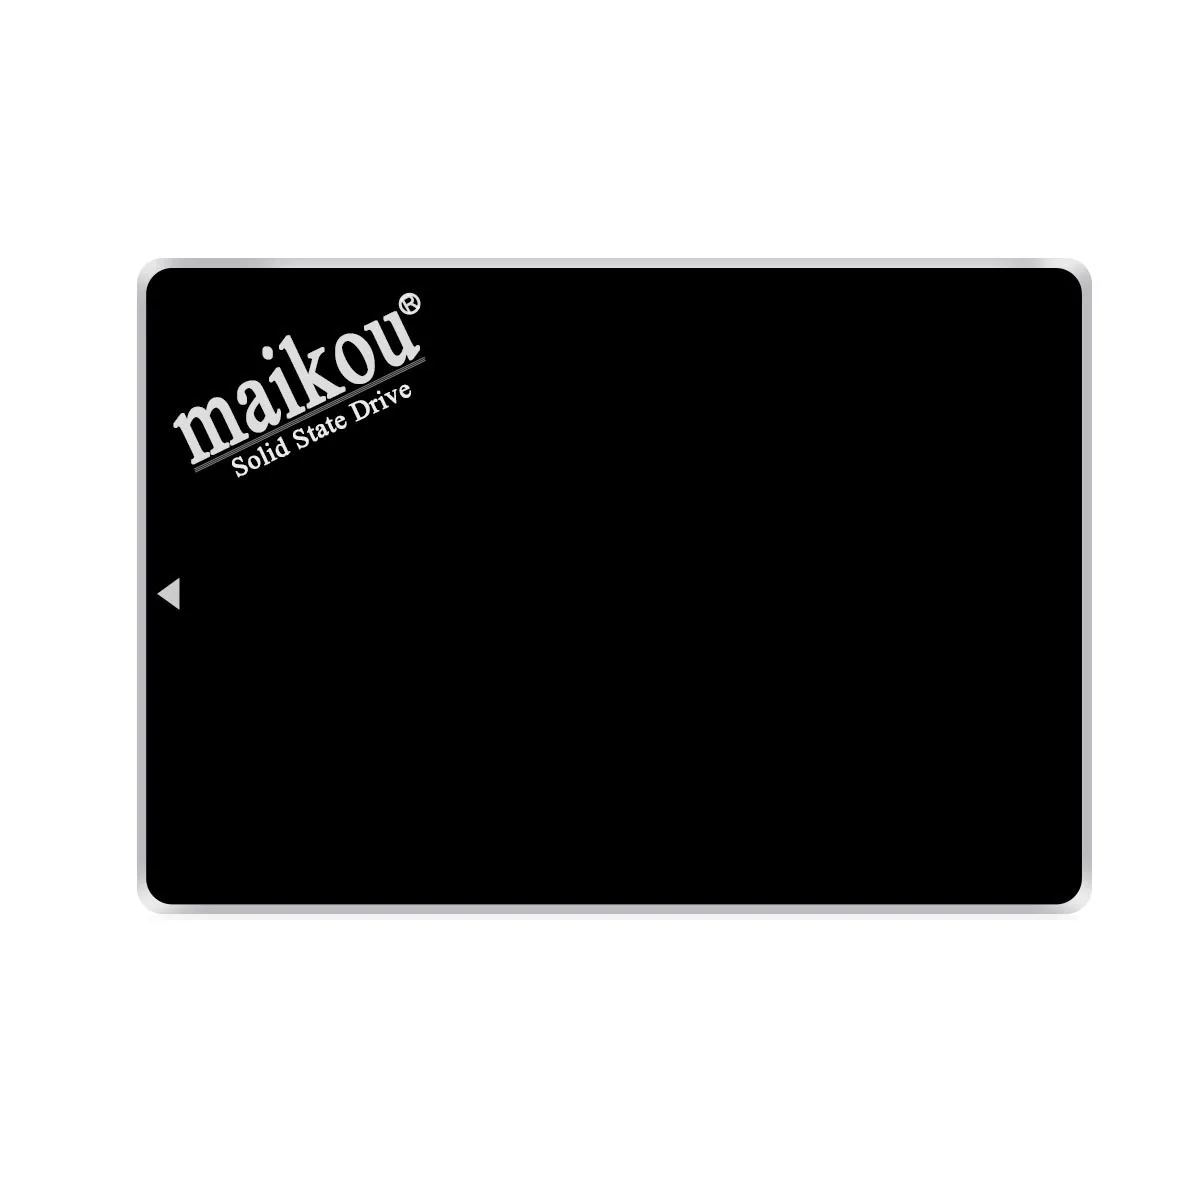 

Maikou Usb3.0 2 In 1 2.5Inch Sata3 6Gb/S Mobile Solid State Drive - Blue 120Gb